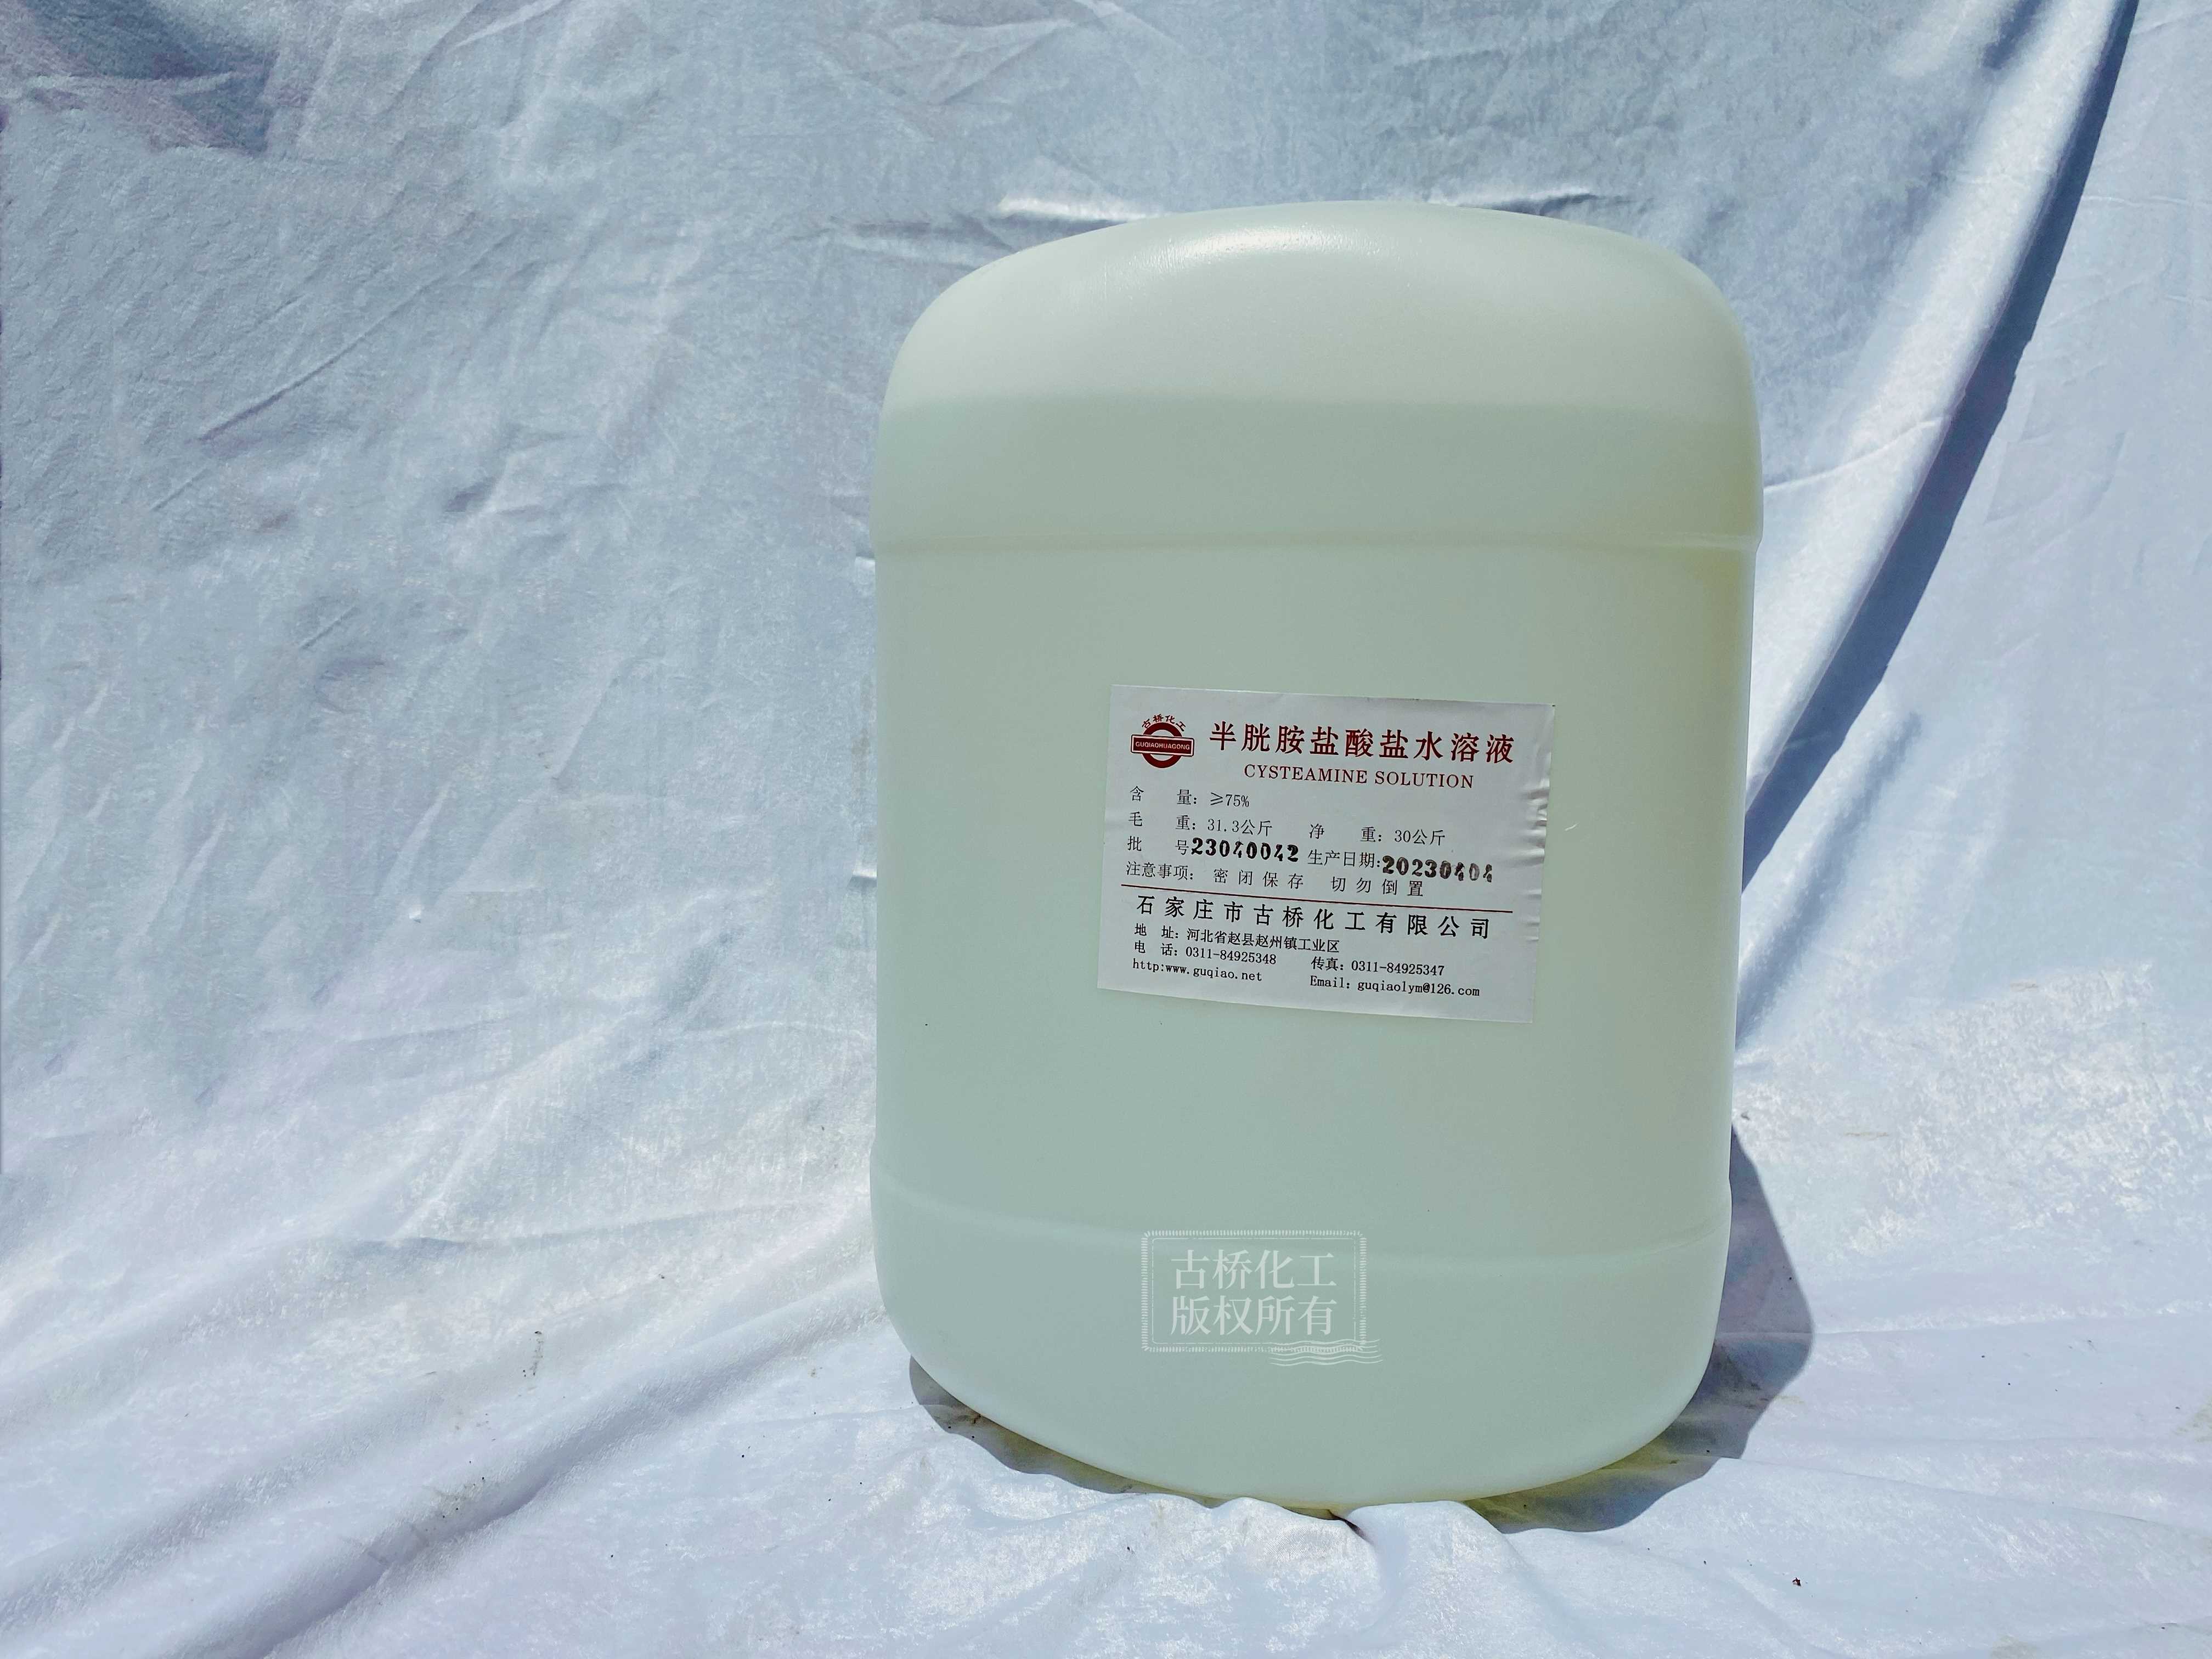 What are the uses of cysteamine hydrochloride aqueous solutions?